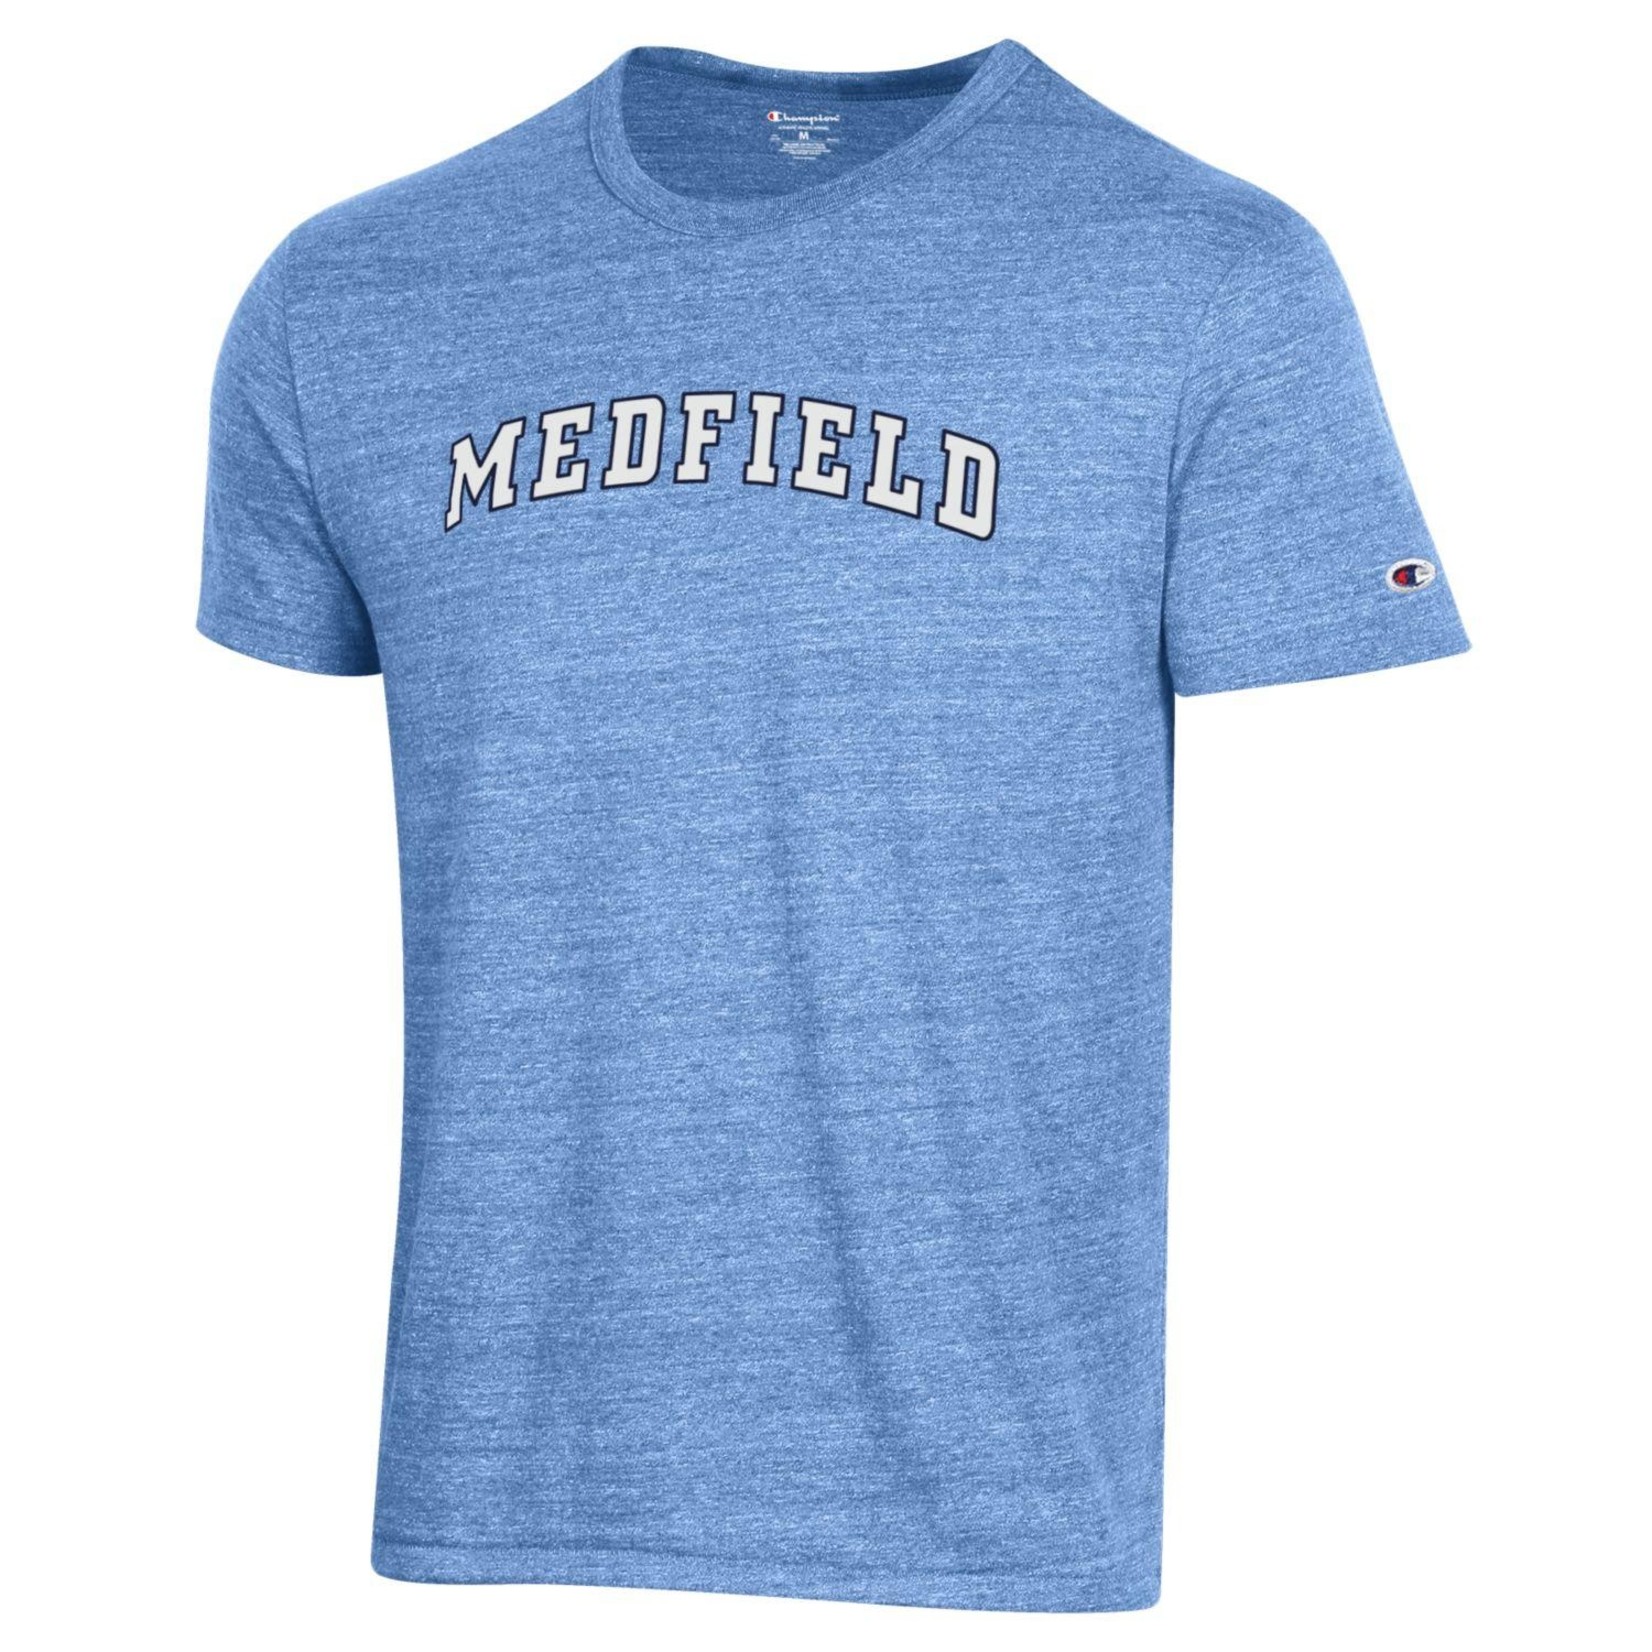 Champion - Adult Medfield Arch - Tri-Blend Tee -